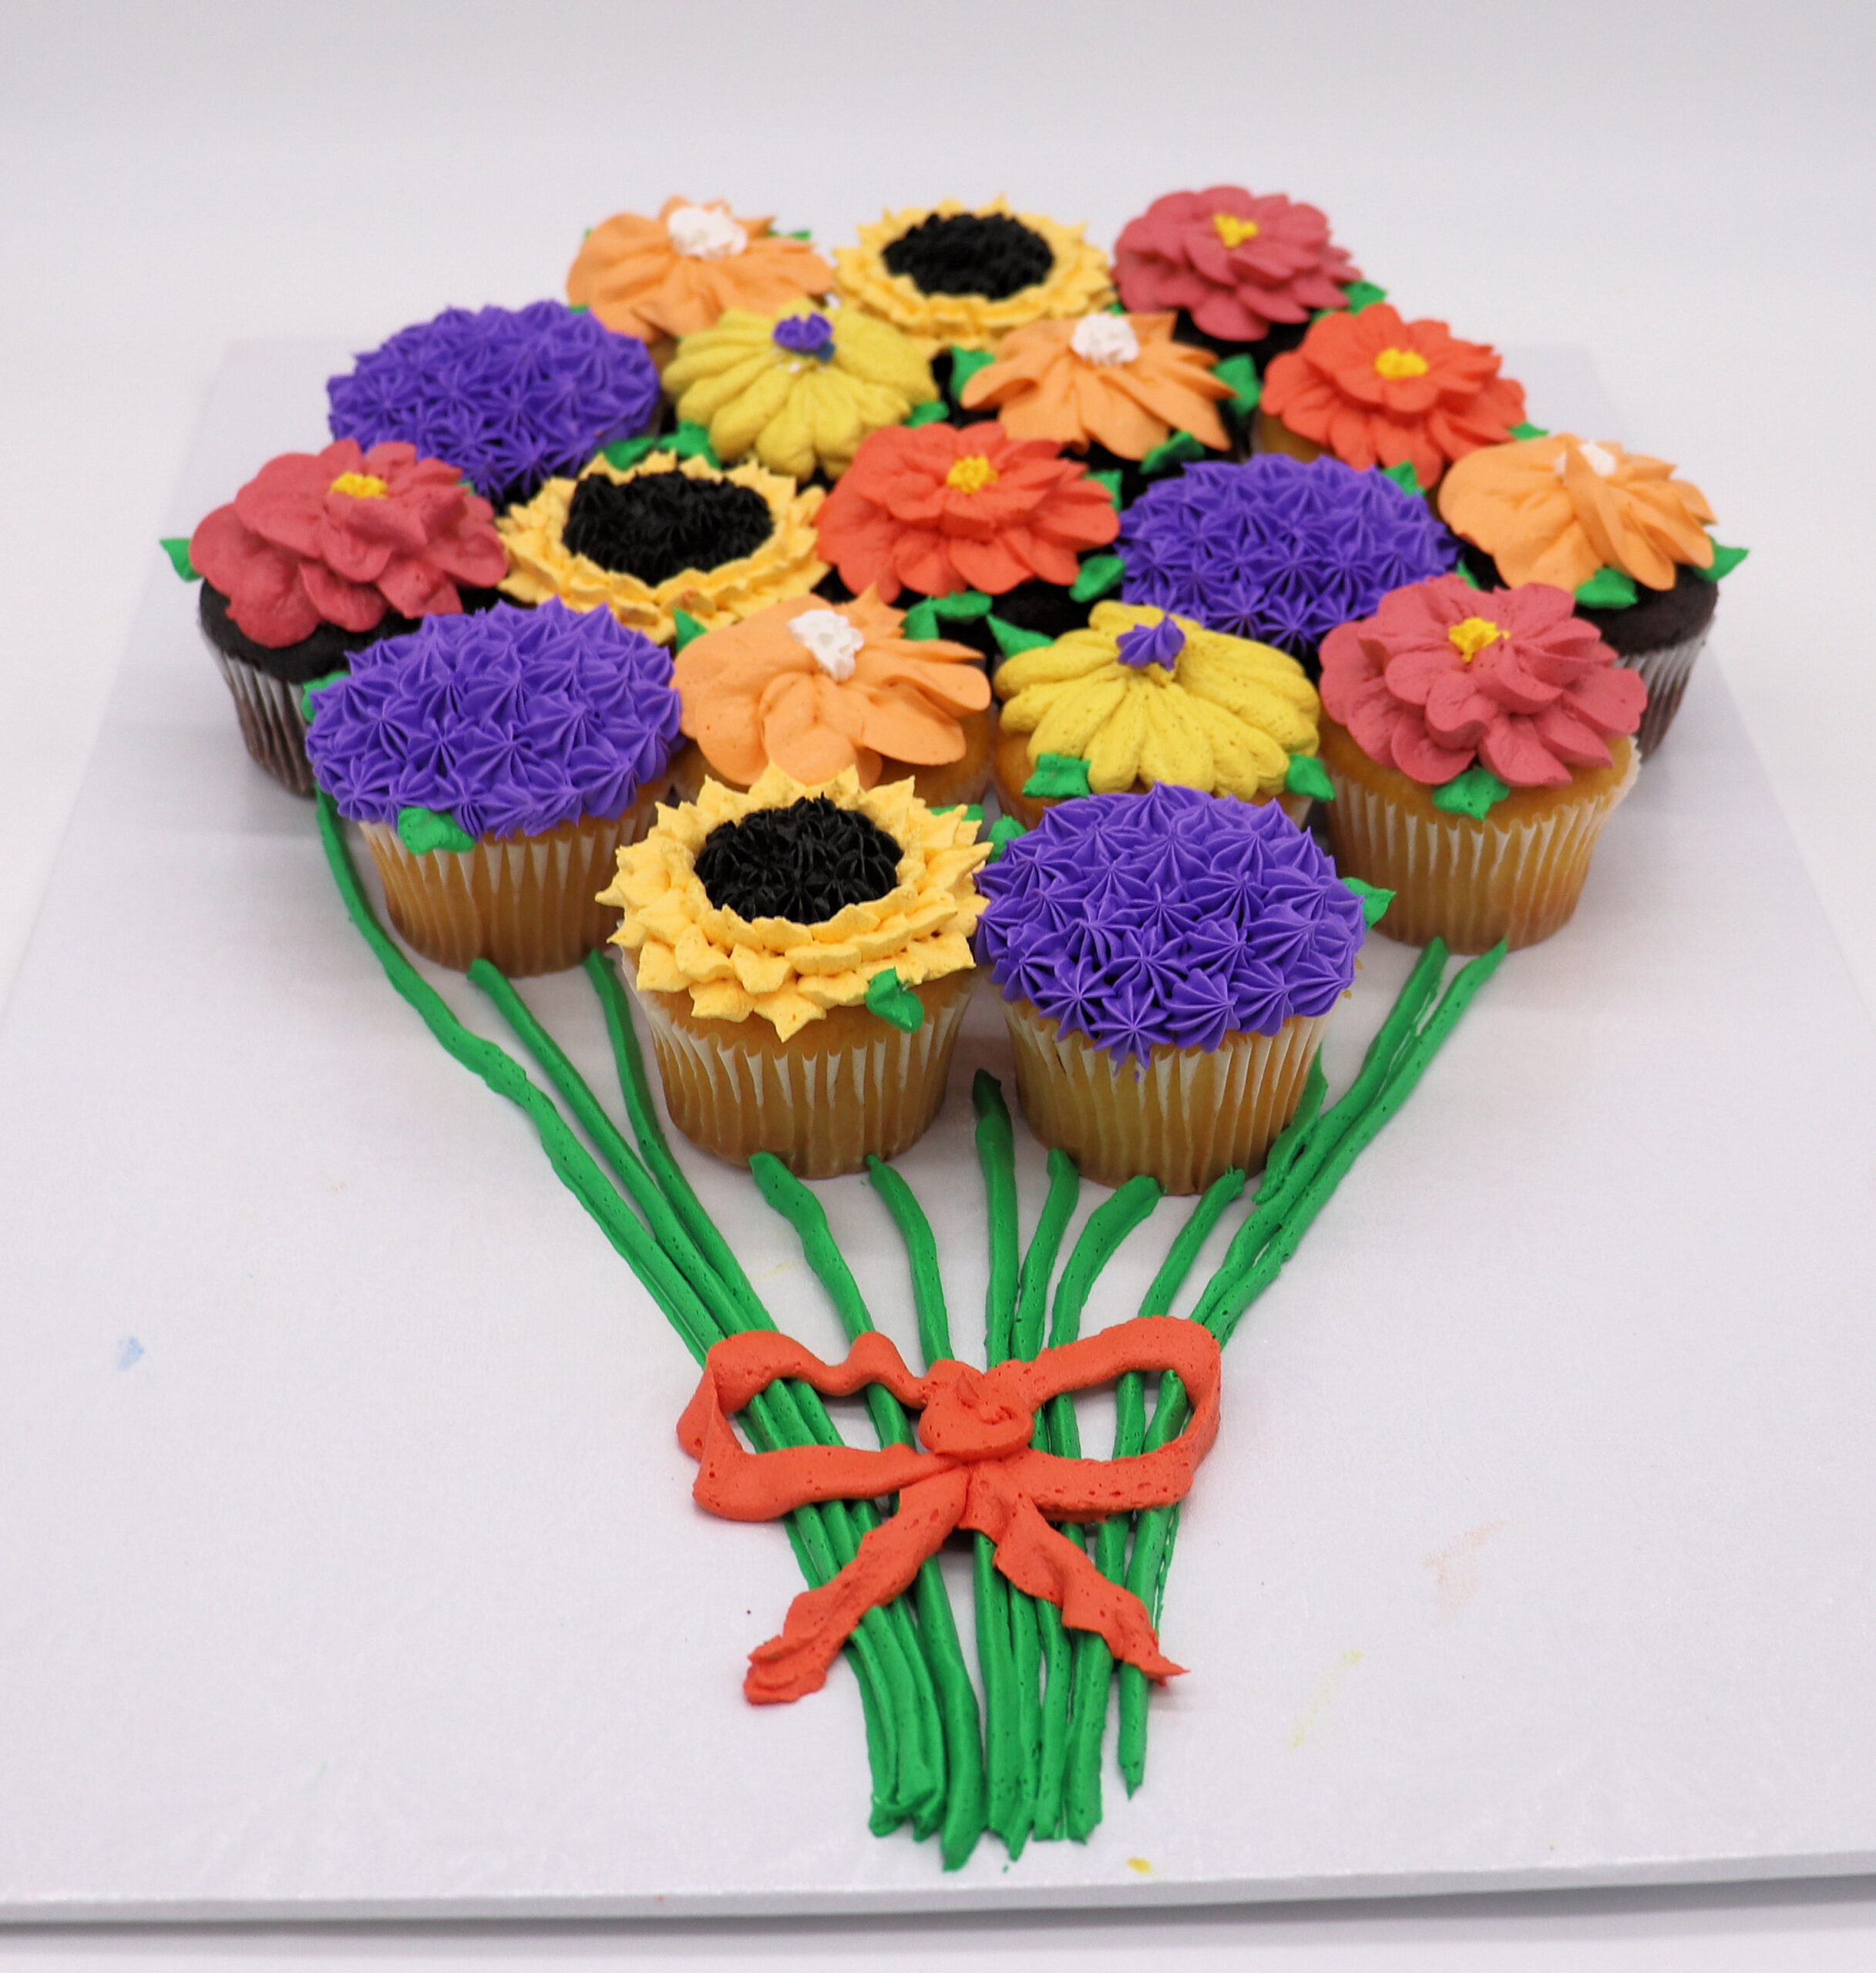 Piped Cupcake bouquets – Piped Flower Bouquets